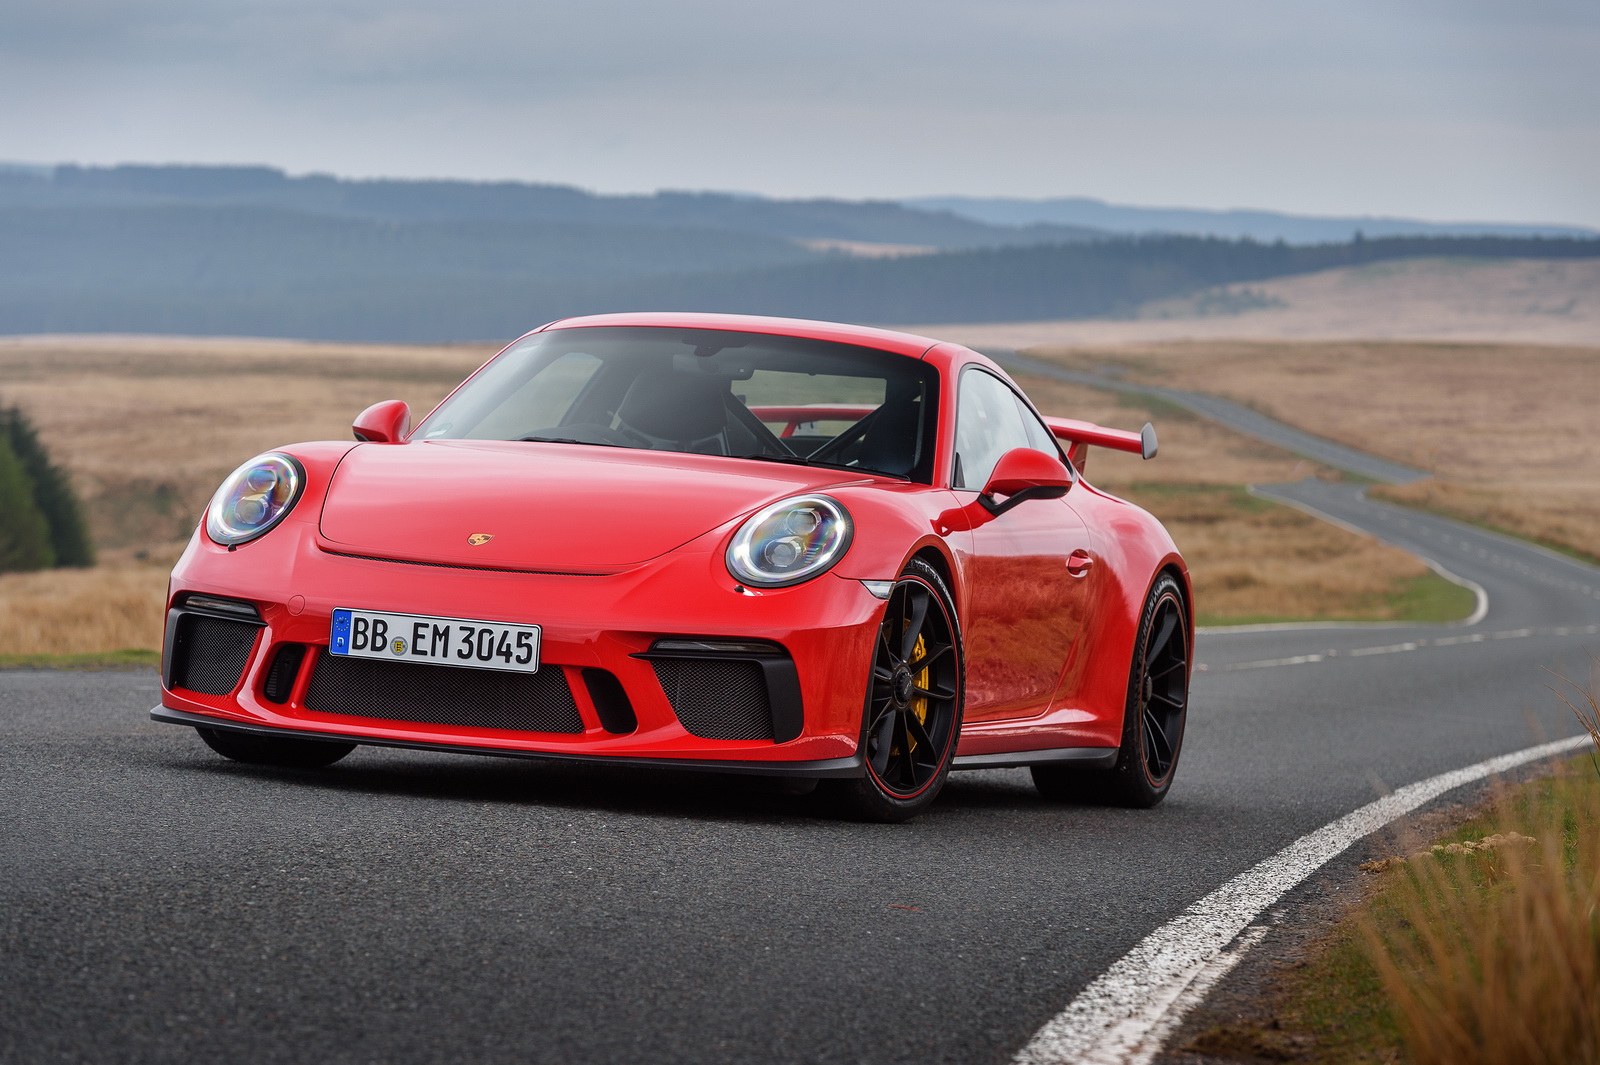 Porsche Most Attractive Brand for US Customers for 13th Straight Year